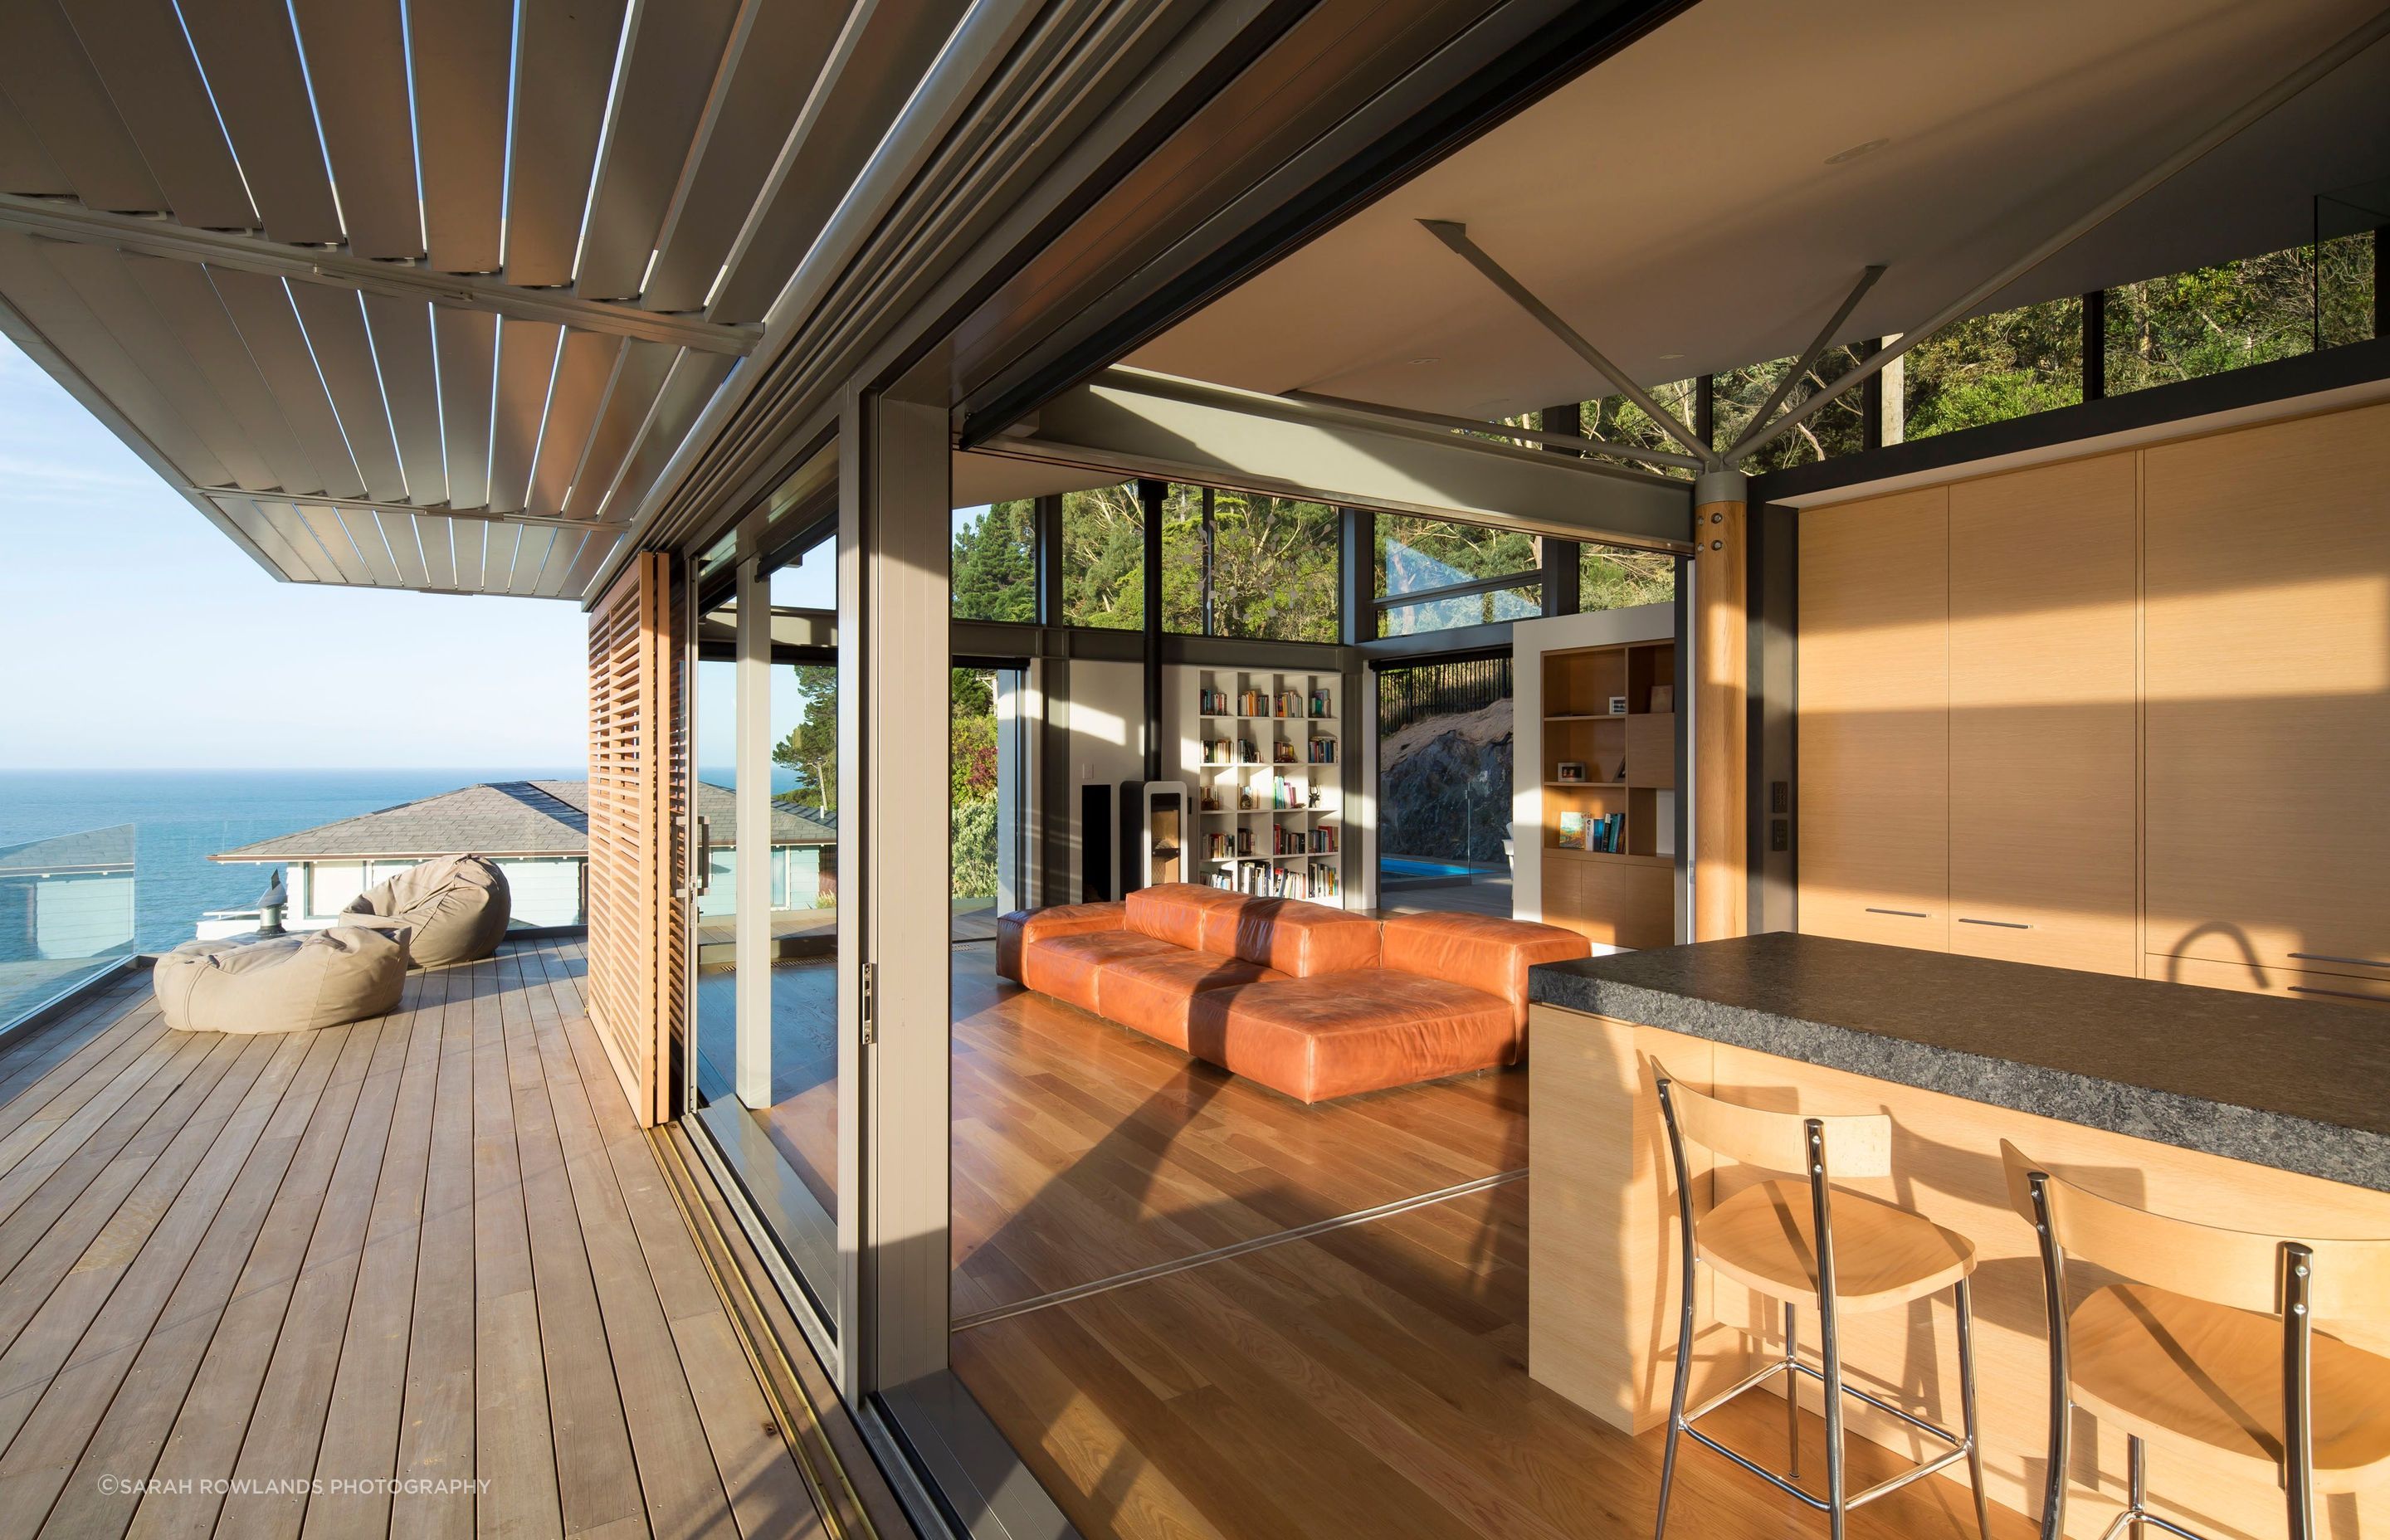 Sliding shutters and automated louvres help mitigate solar gain from the afternoon sun.